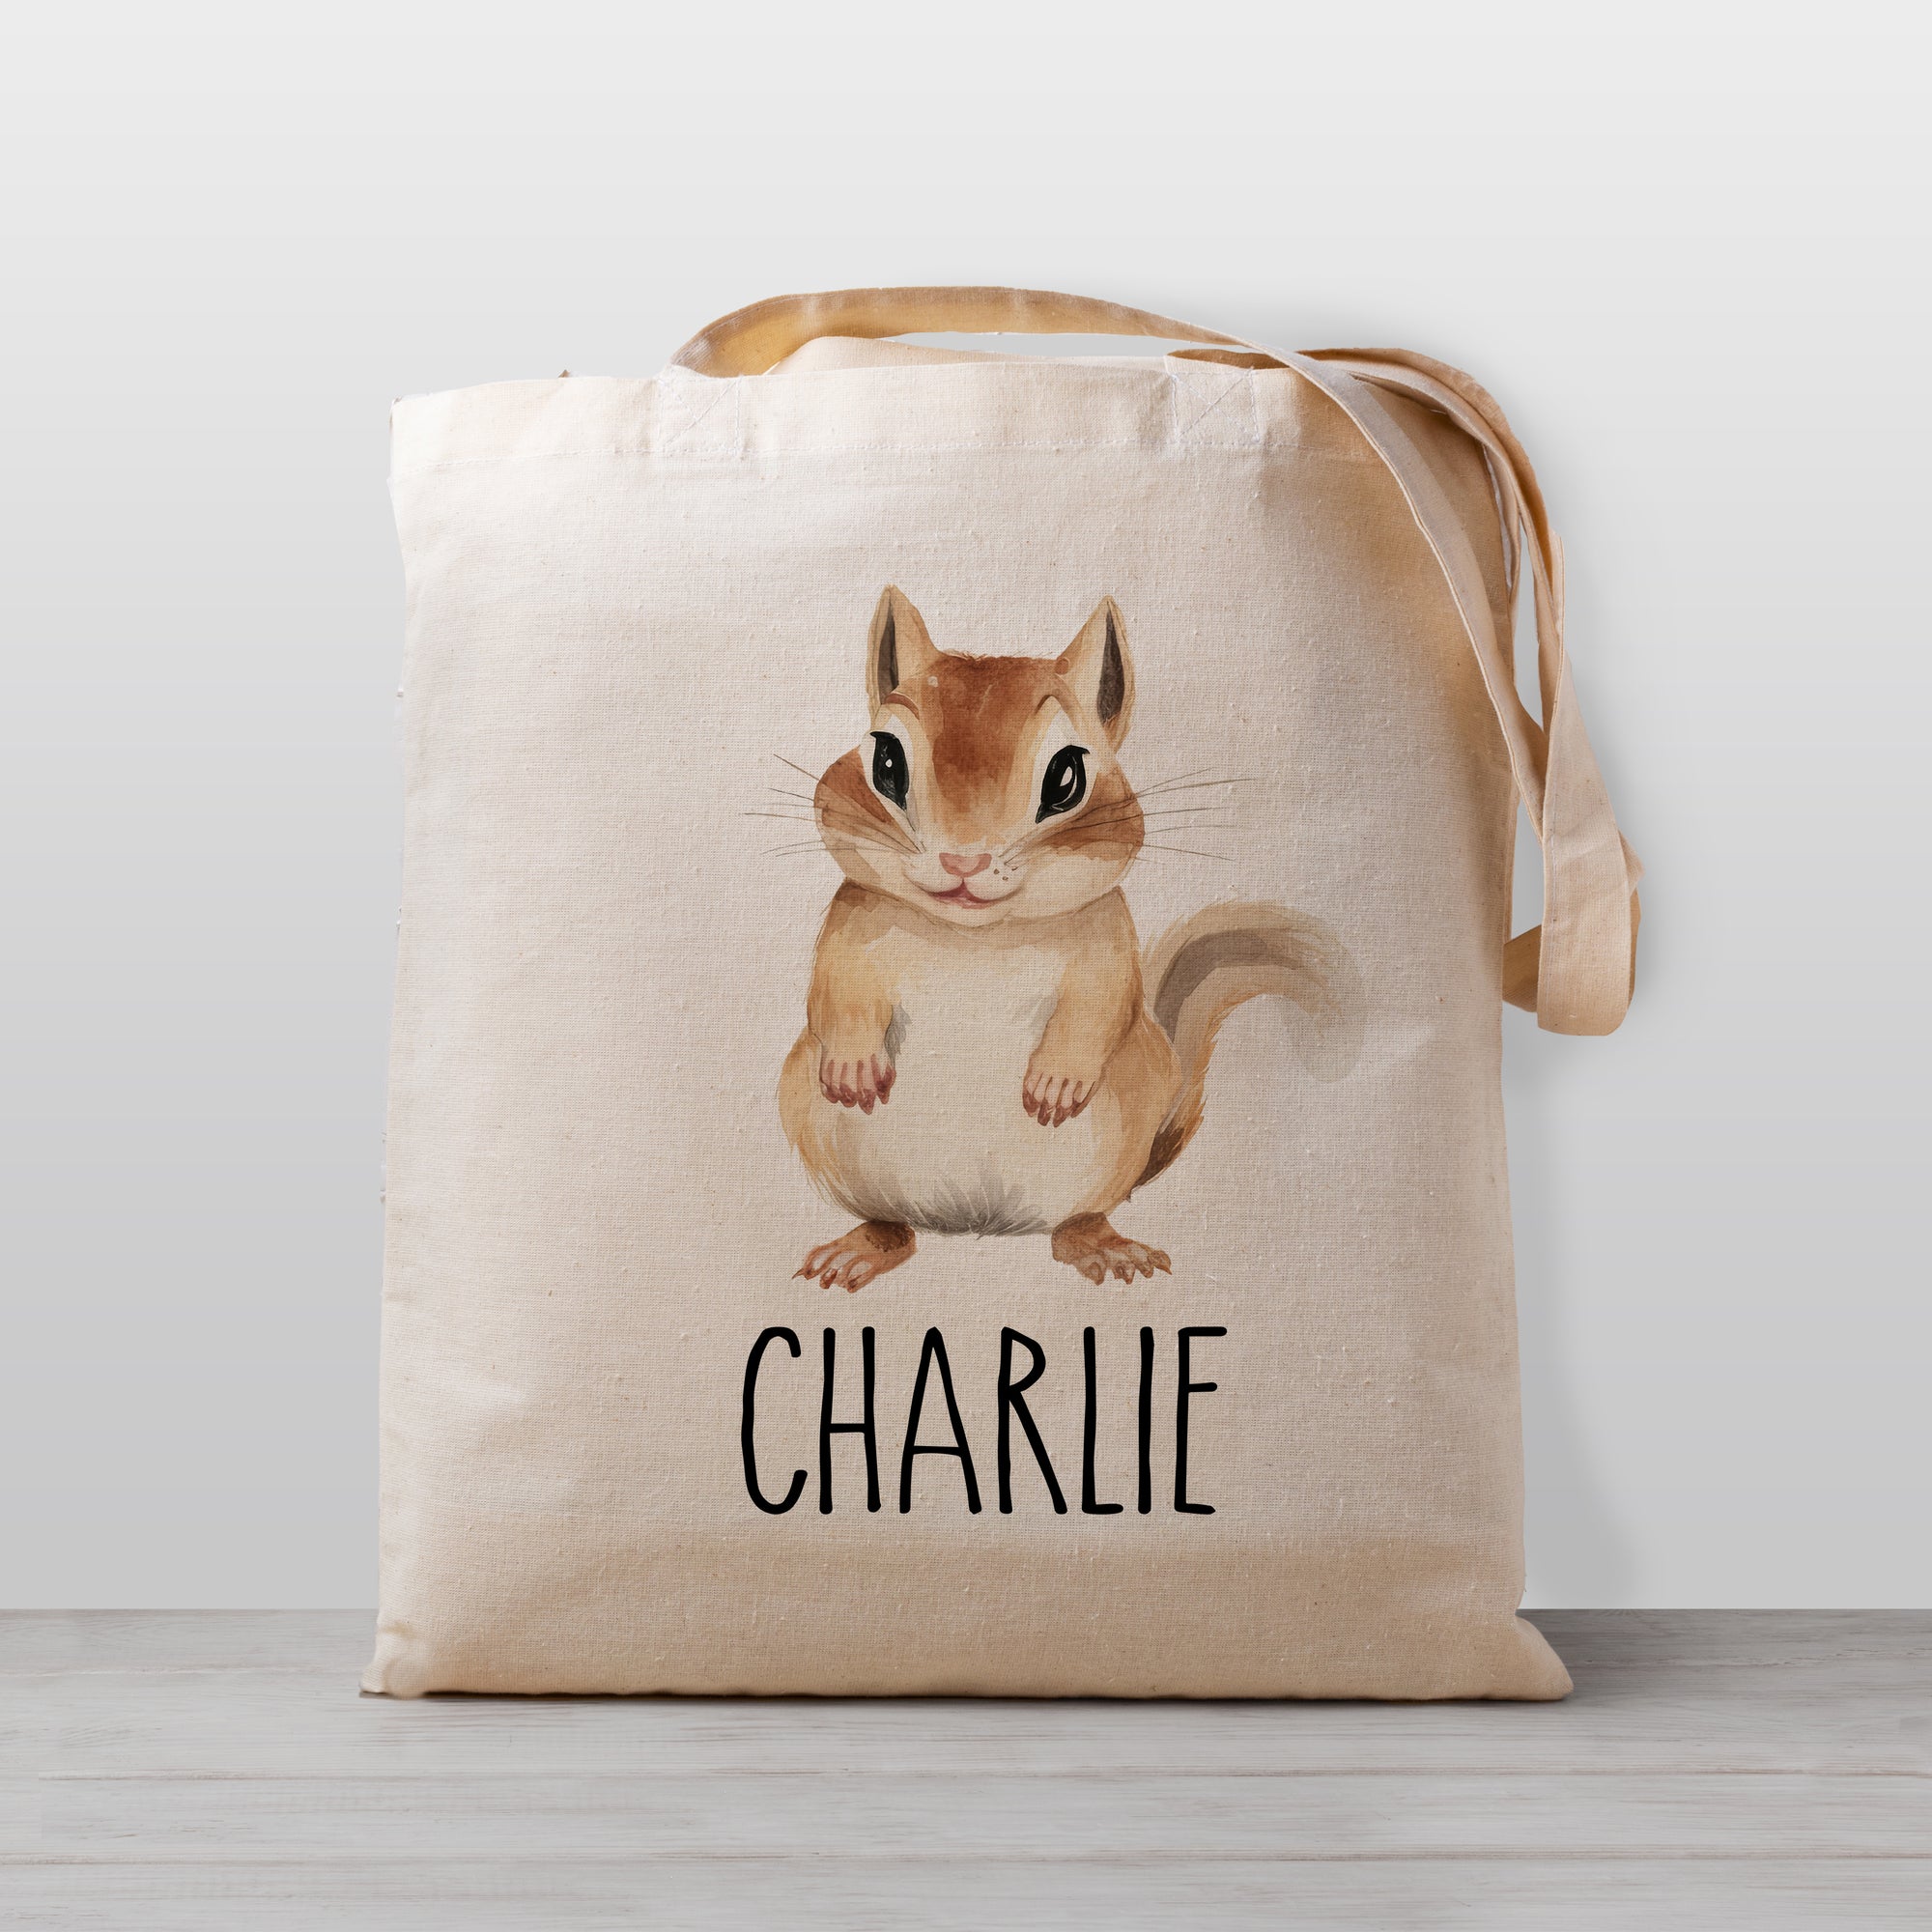 Chipmunk tote bag, personalized with your child's name. Great for preschool, daycare, or as a library book bag